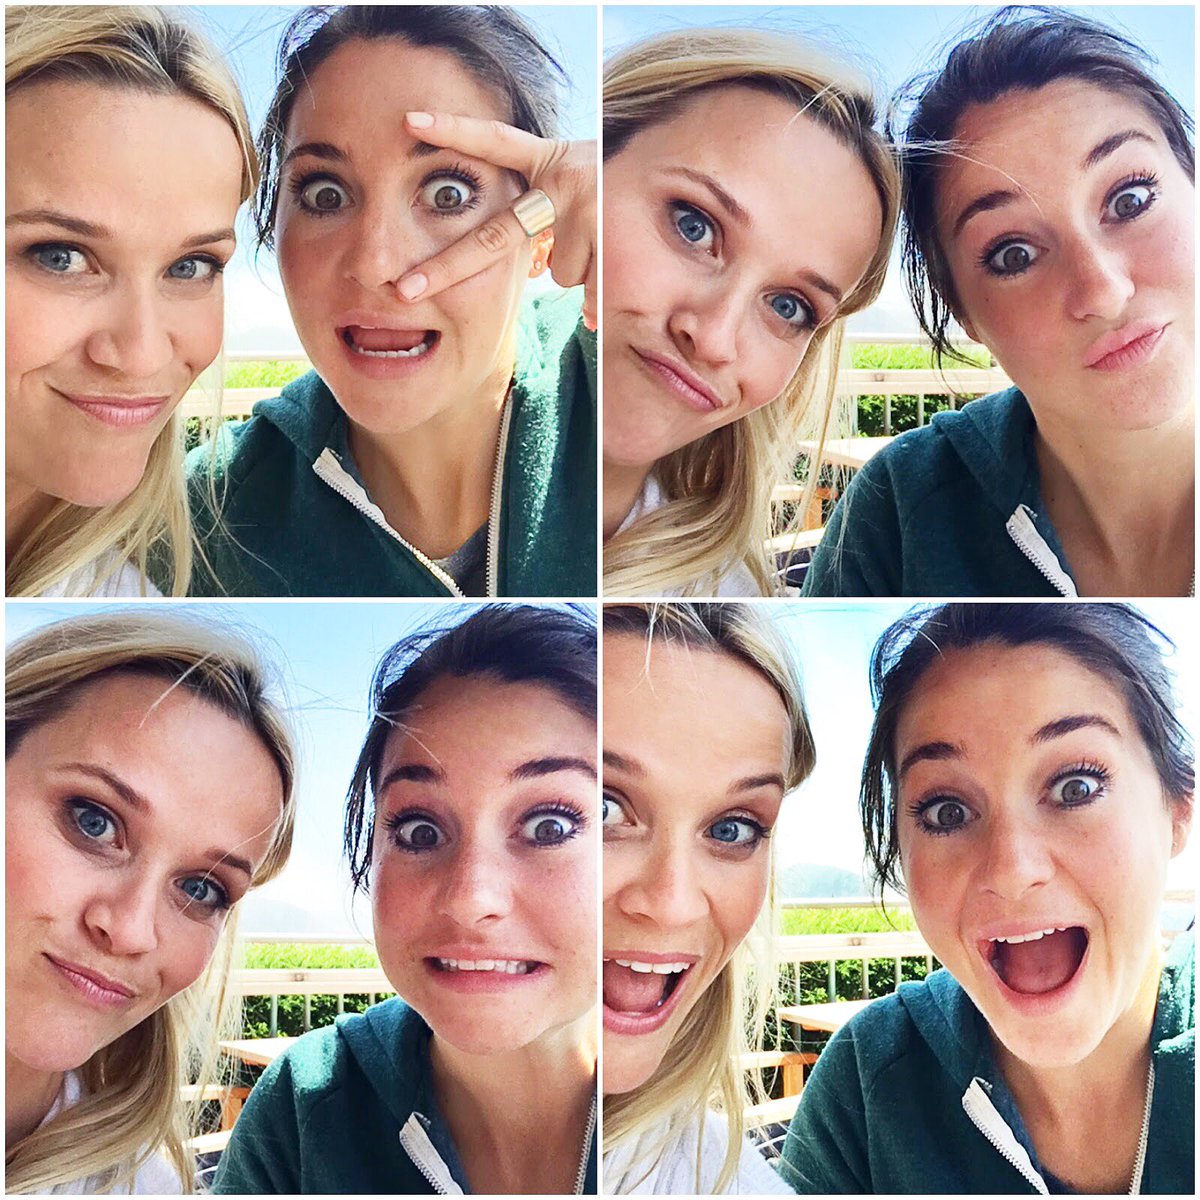 #WCW -- ???? this #FunnyFace so much! Beautiful inside and out! @shailenewoodley #BigLittleLies @HBO #ActNatural https://t.co/QWdZGdnCr5